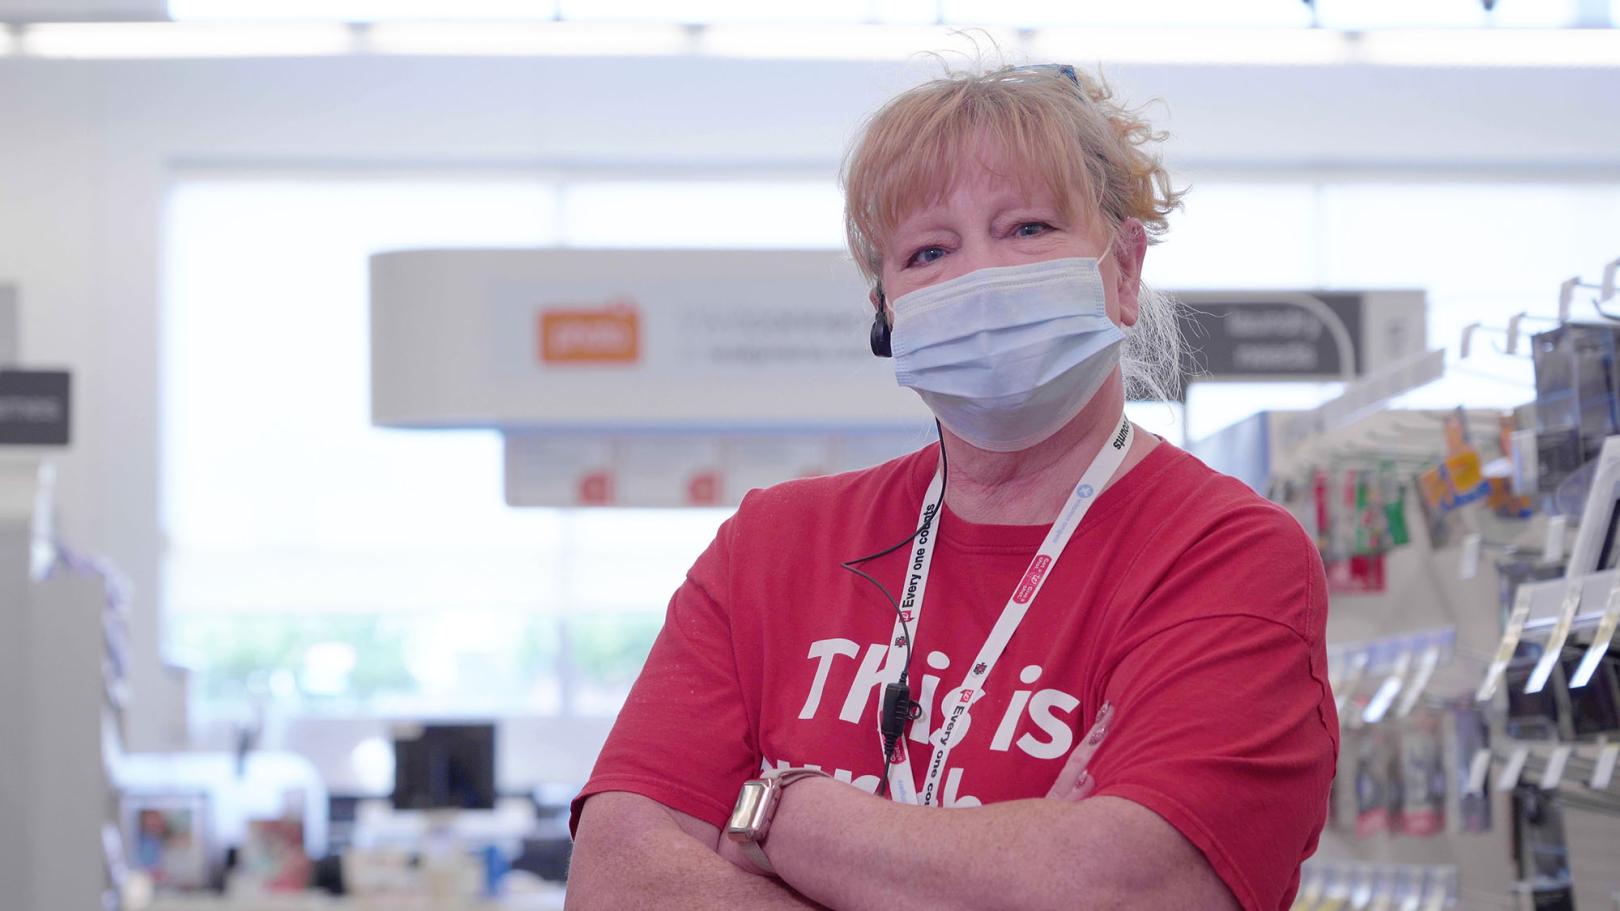 Walgreens team member ready to serve patients and customers